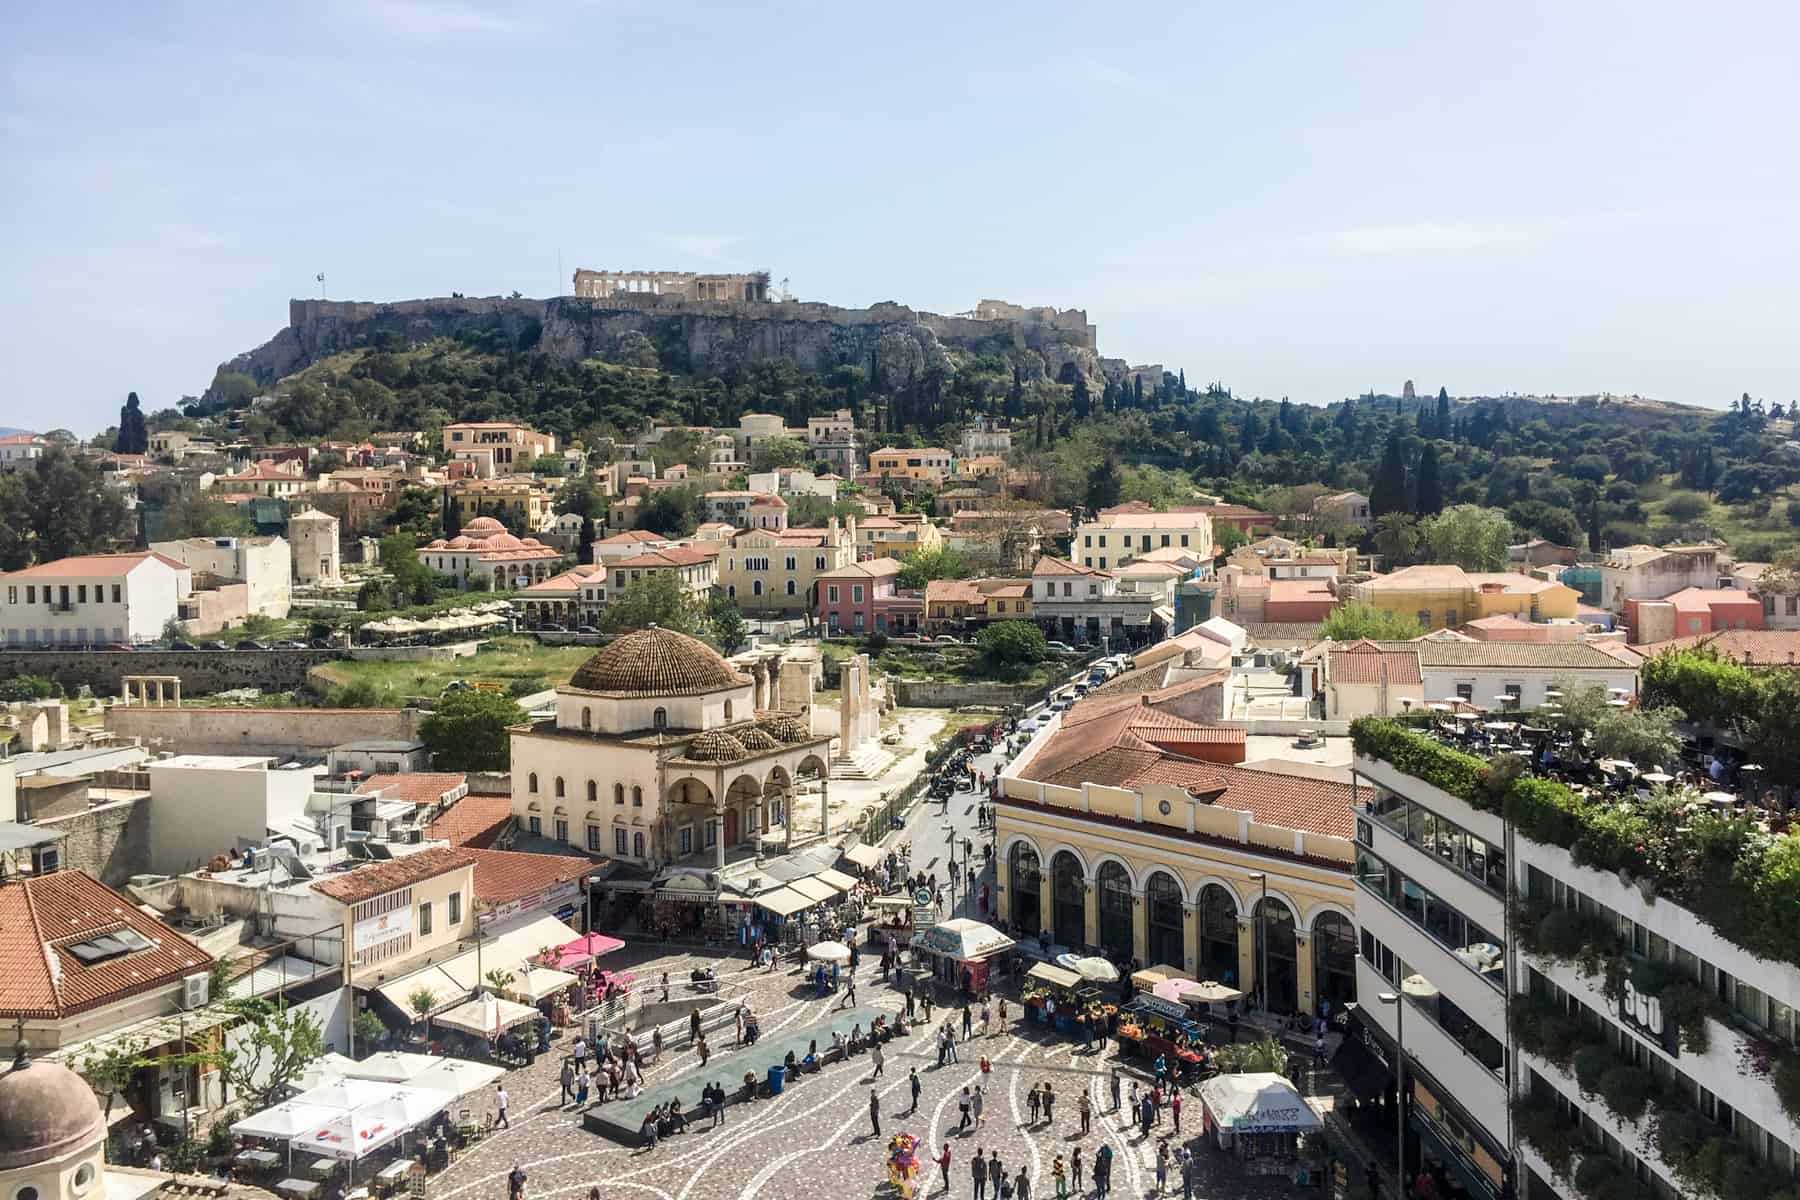 An elevated view of old Athens city looking over Monastiraki Square and towards the Acropolis.